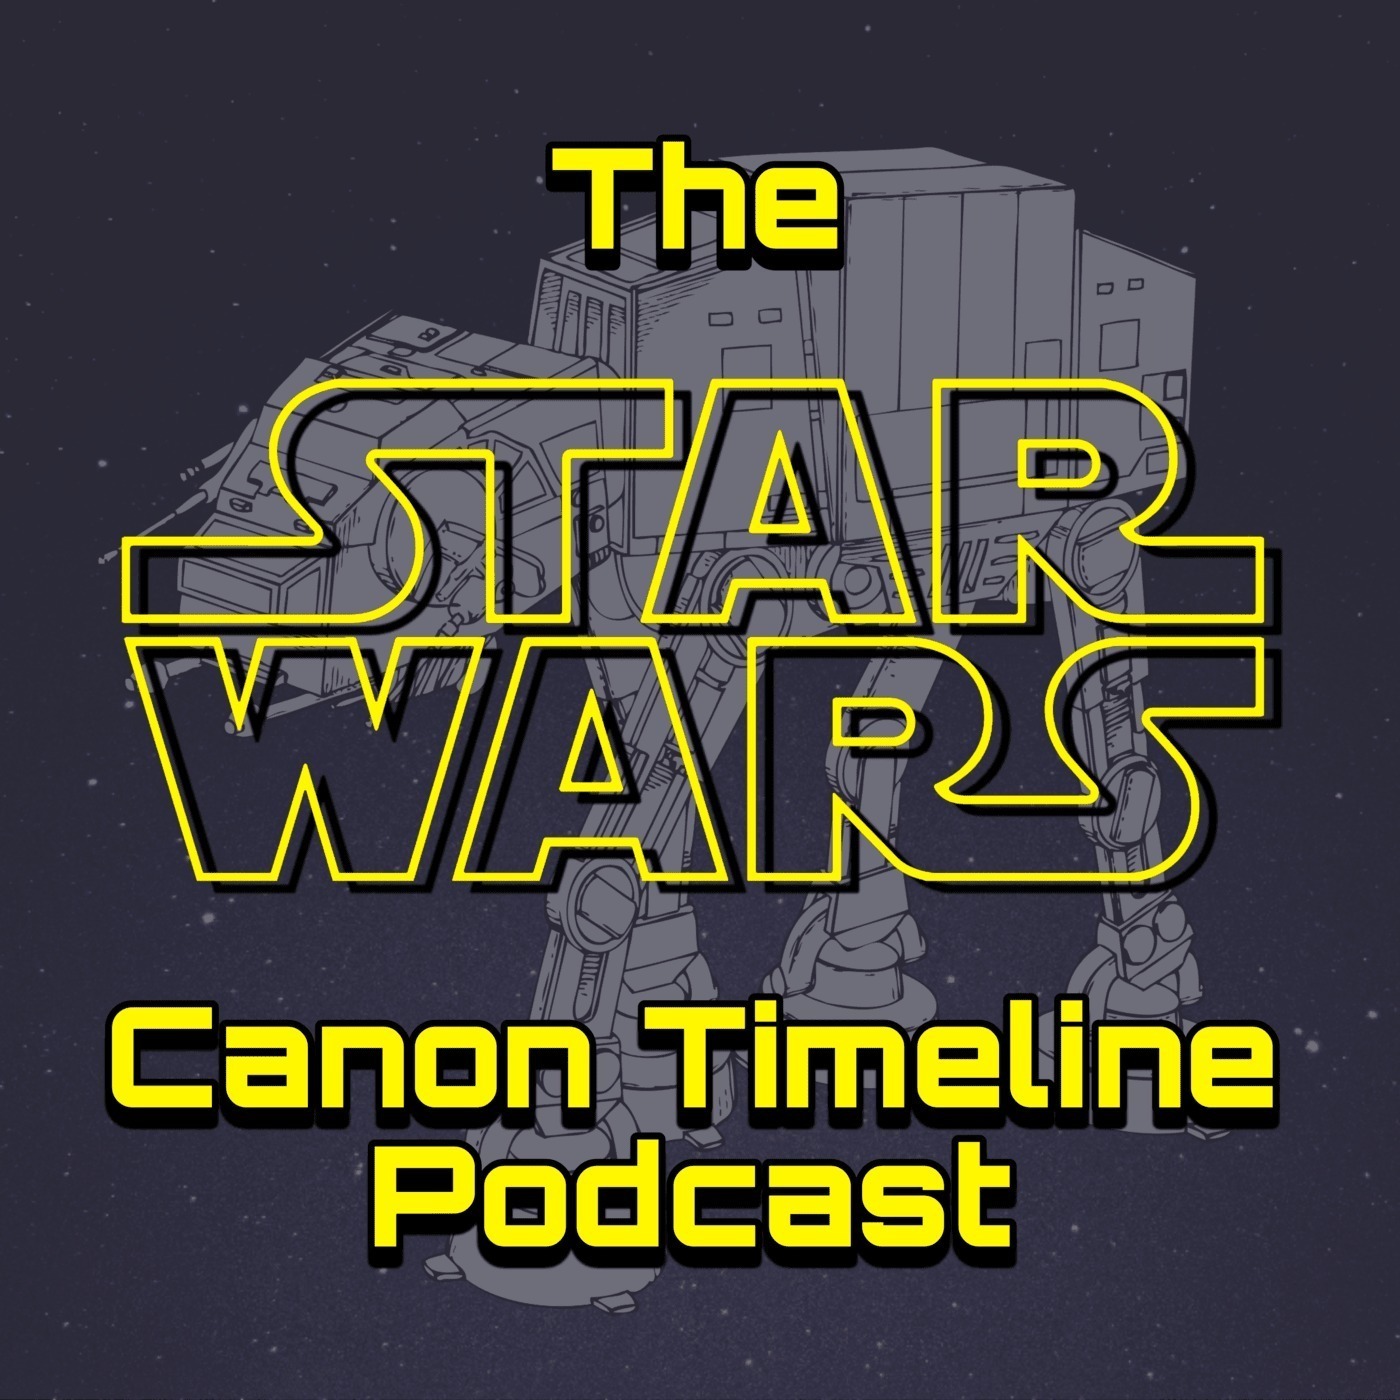 The Star Wars Complete Canon Timeline Podcast The Acolyte